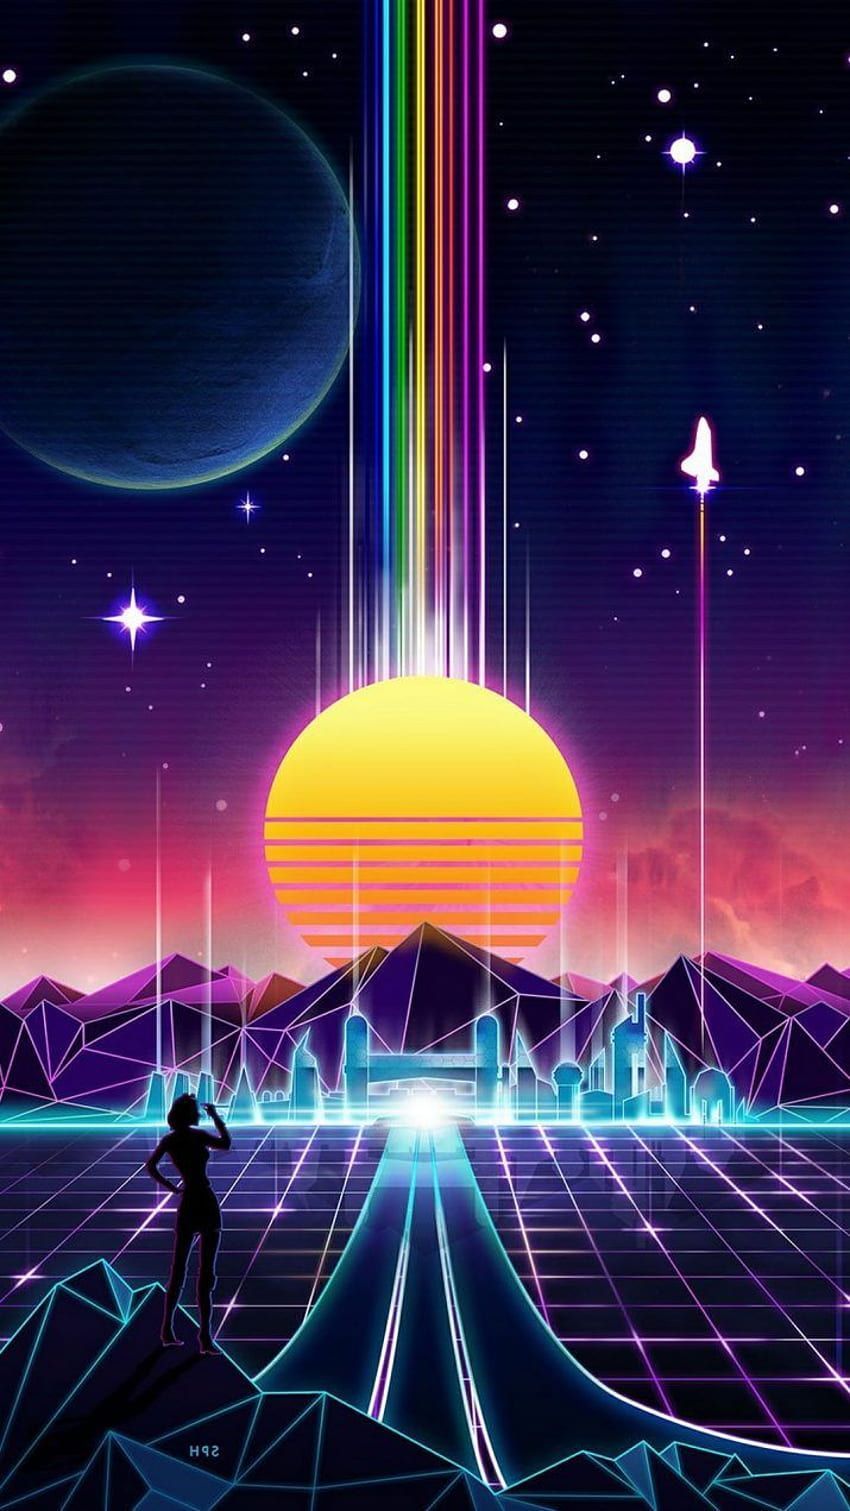 A retro style artwork of an alien planet with stars and planets - Trippy